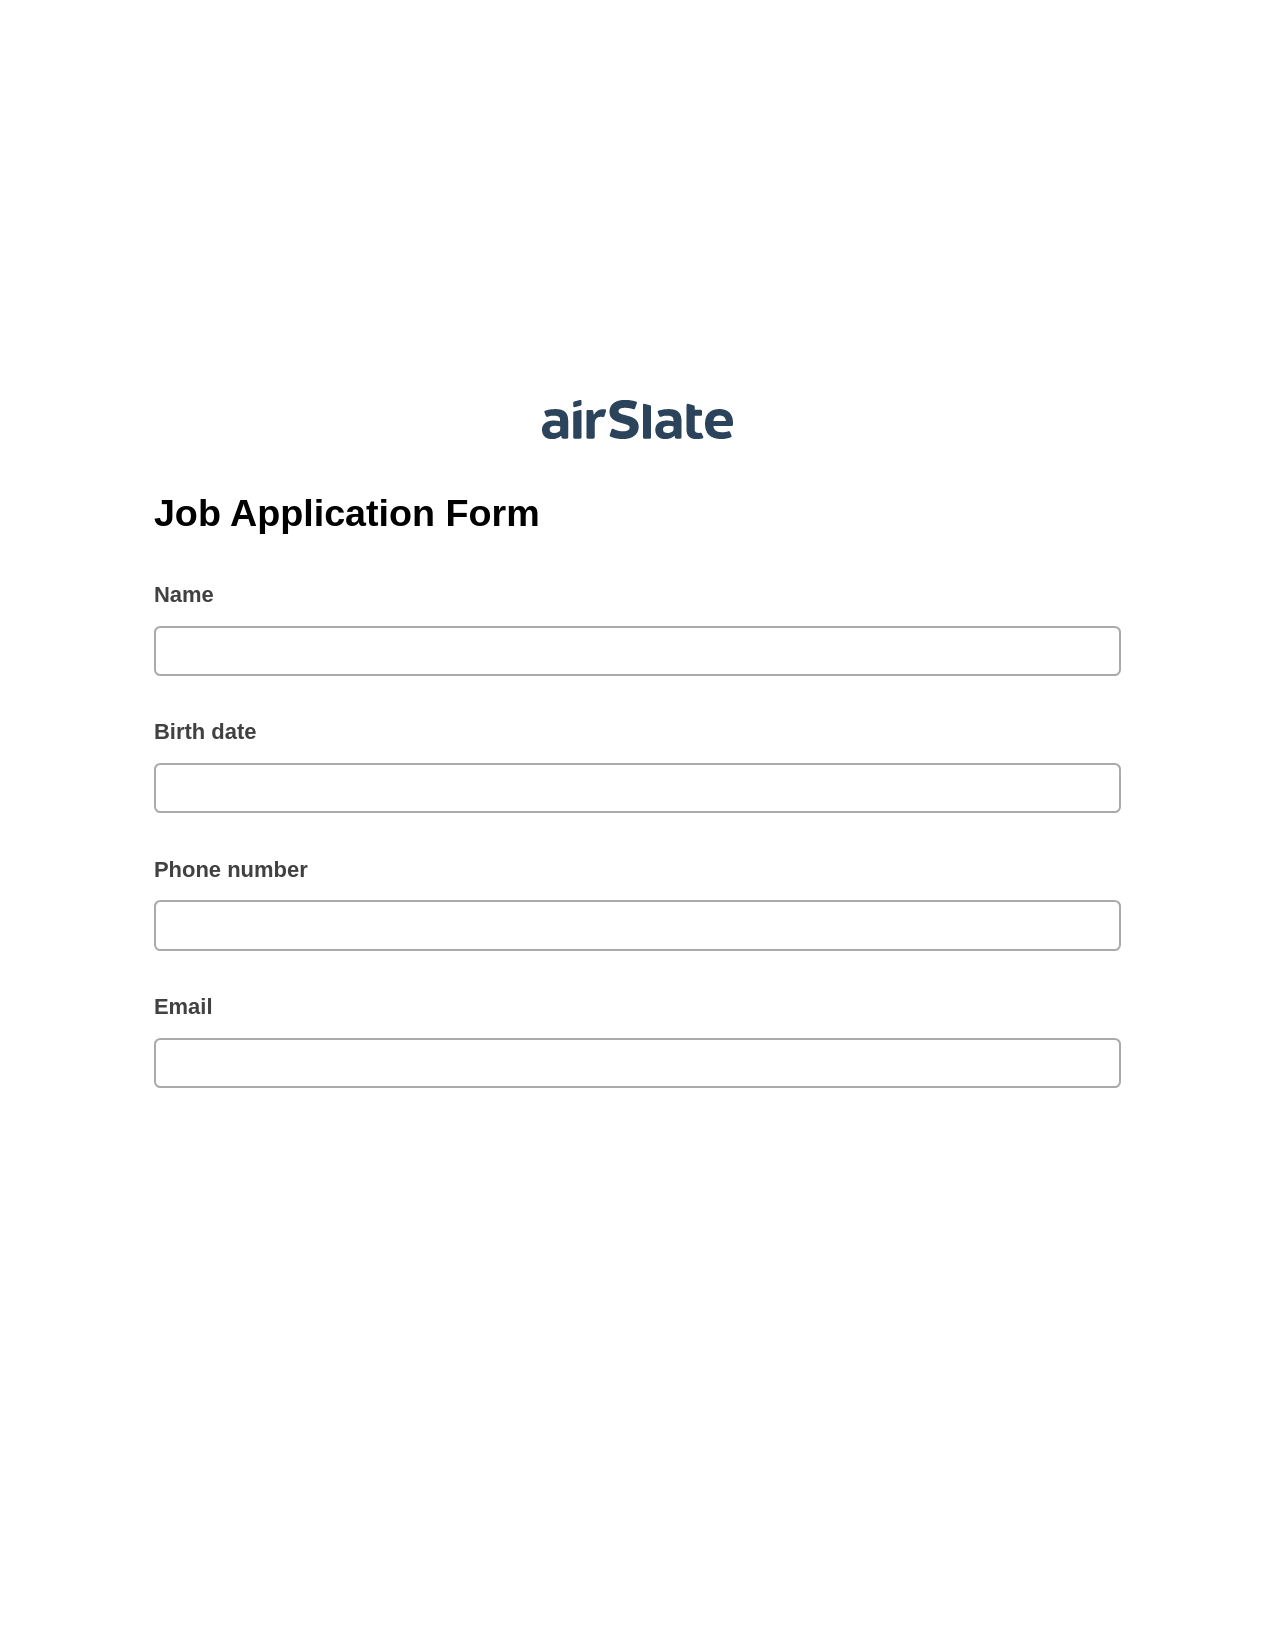 Multirole Job Application Form Pre-fill Dropdown from Airtable, Google Sheet Two-Way Binding Bot, Post-finish Document Bot